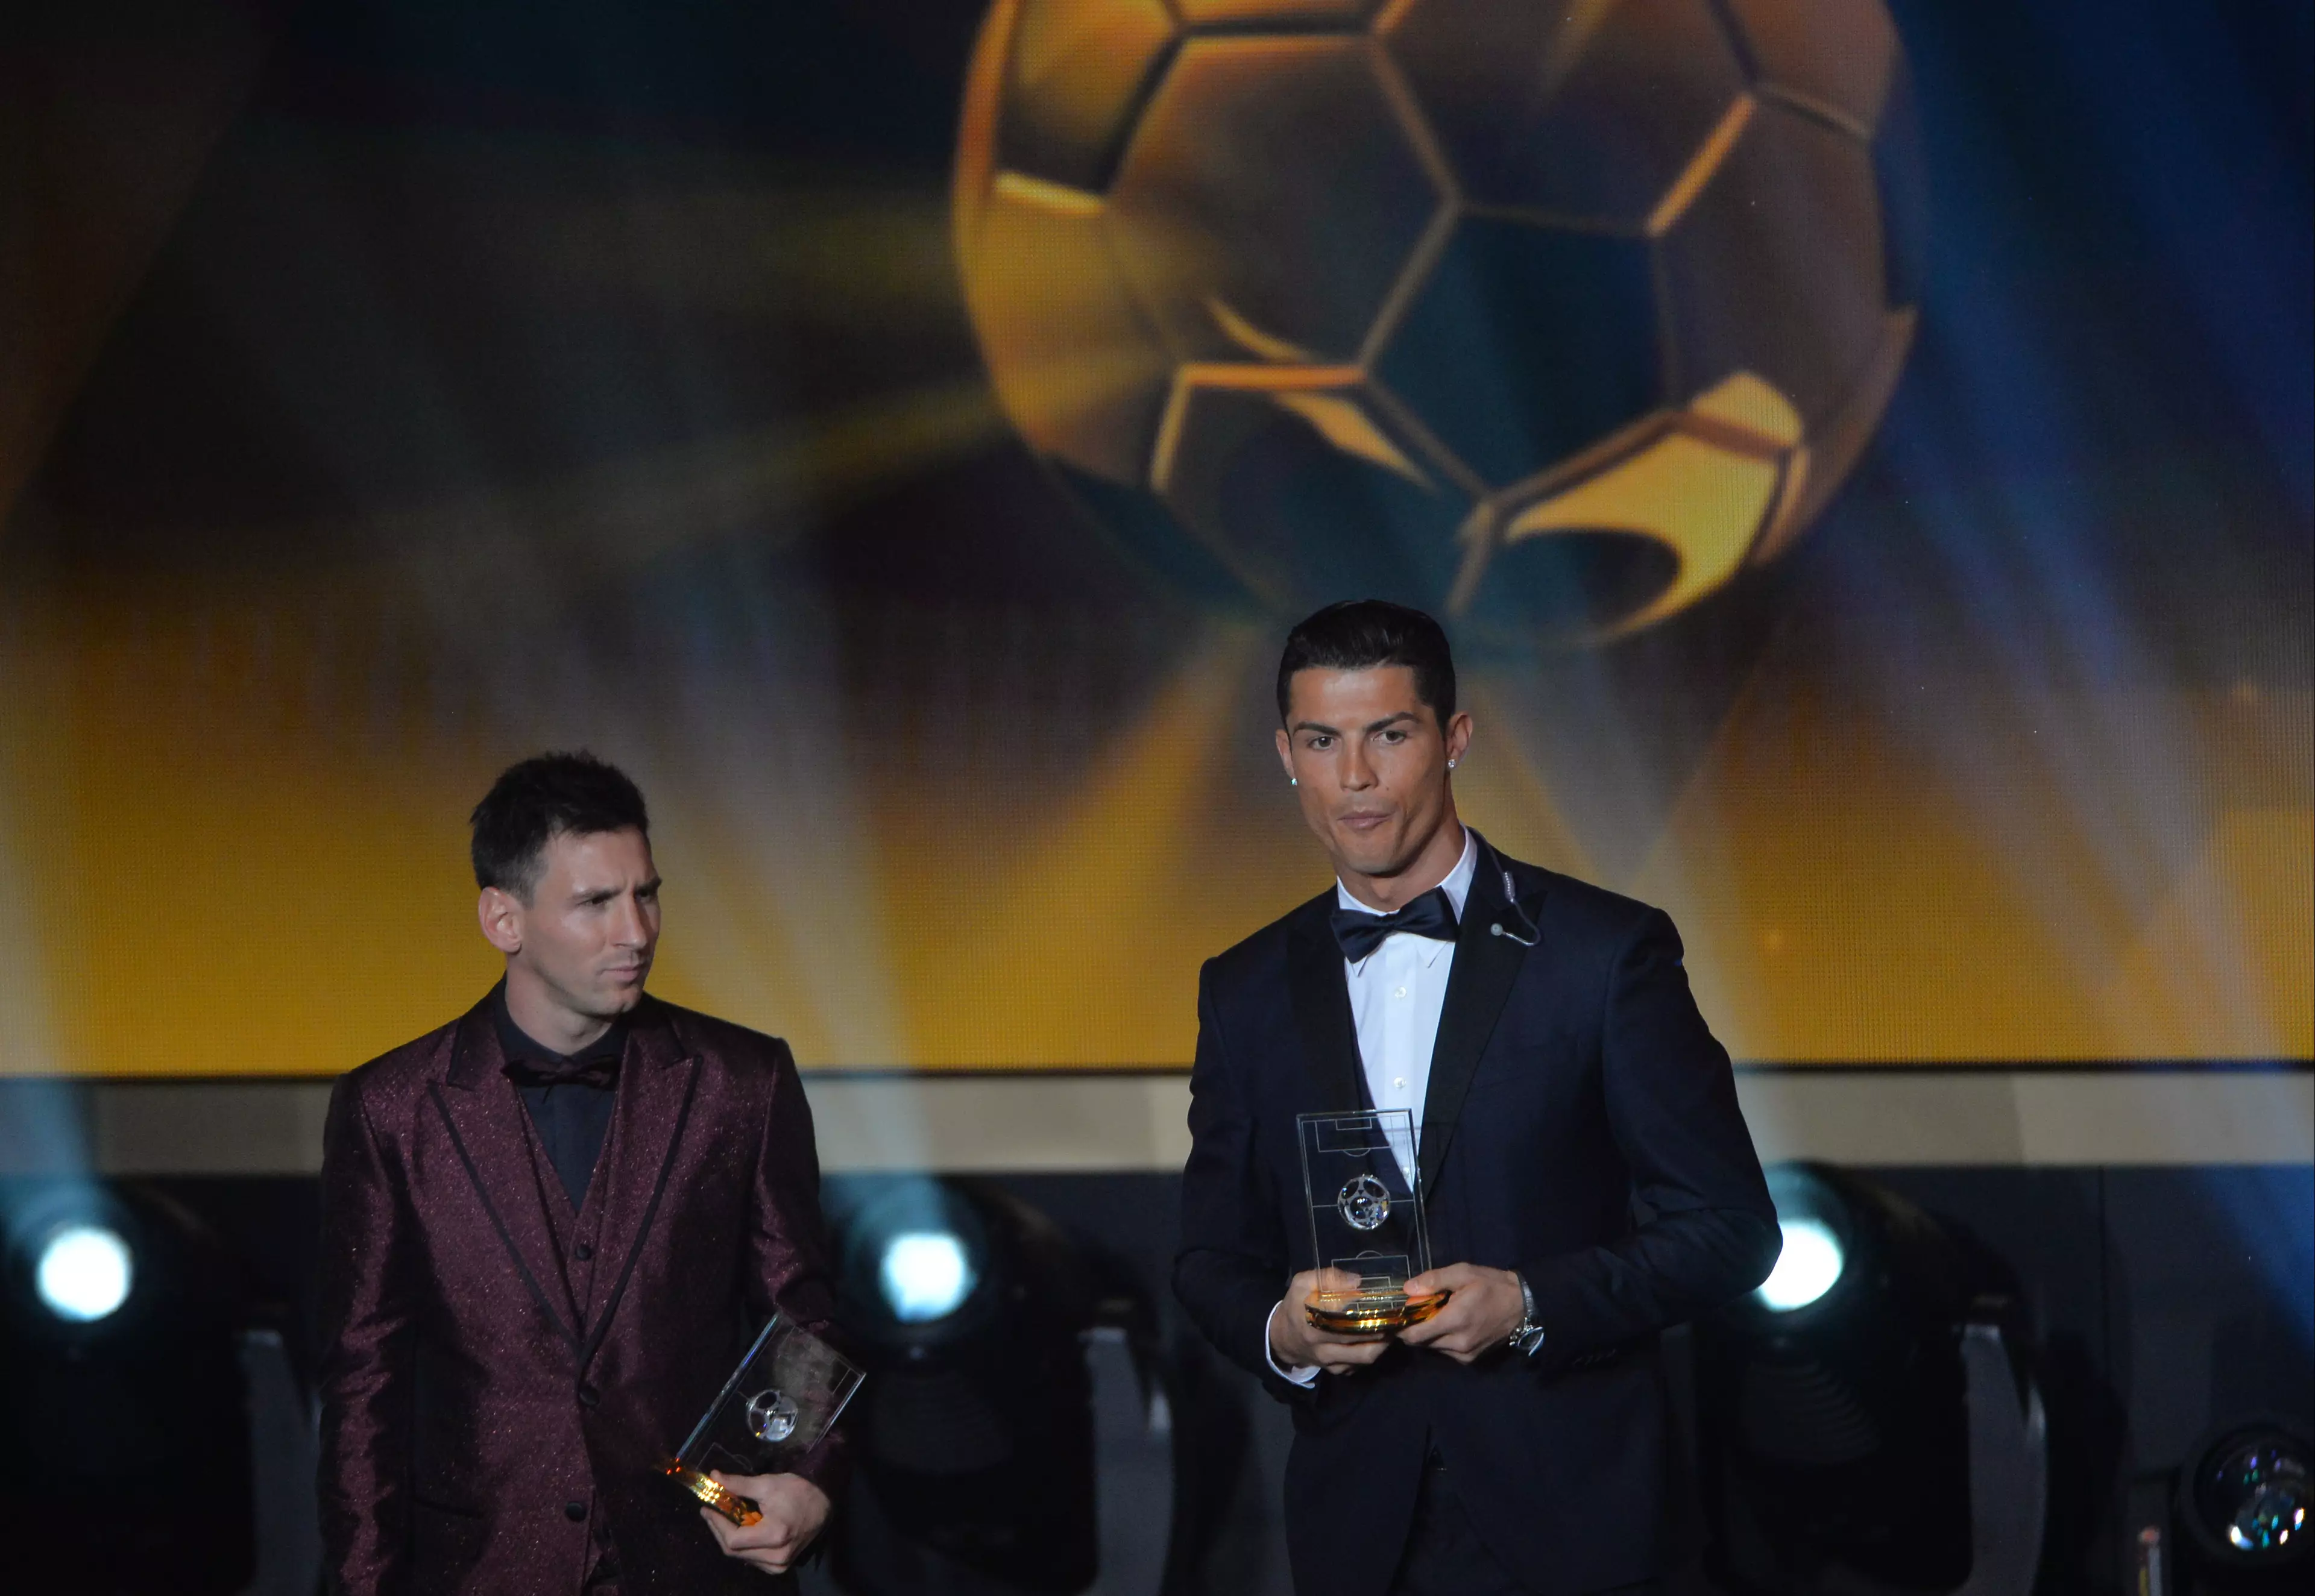 Lionel Messi and Cristiano Ronaldo have won the last 11 Ballon d'Ors between them